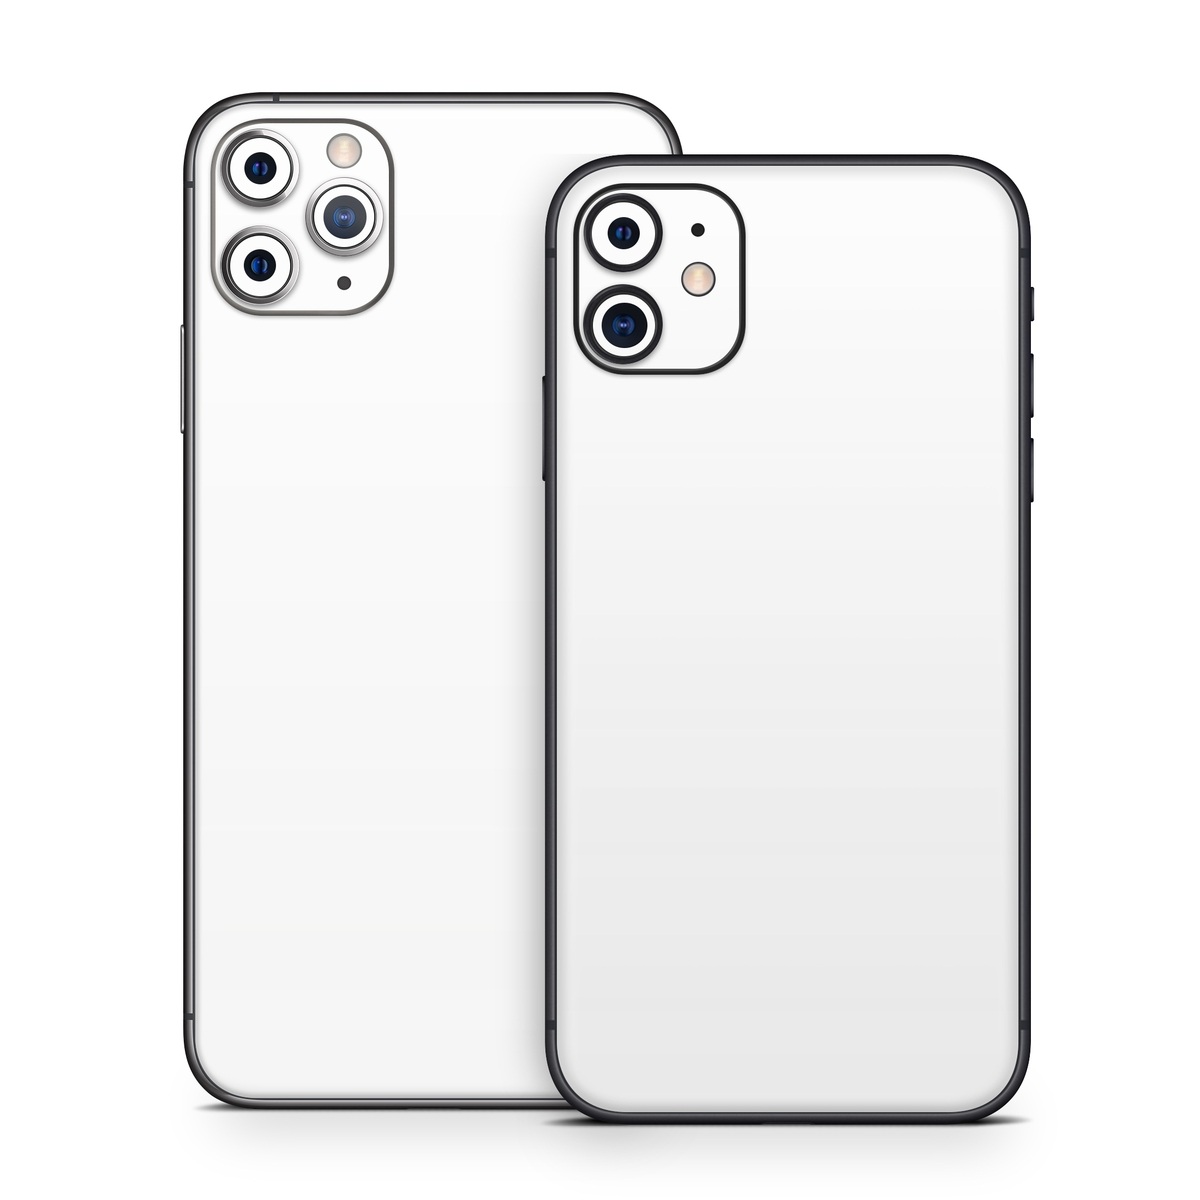 iPhone 11 Skin design of White, Black, Line, with white colors